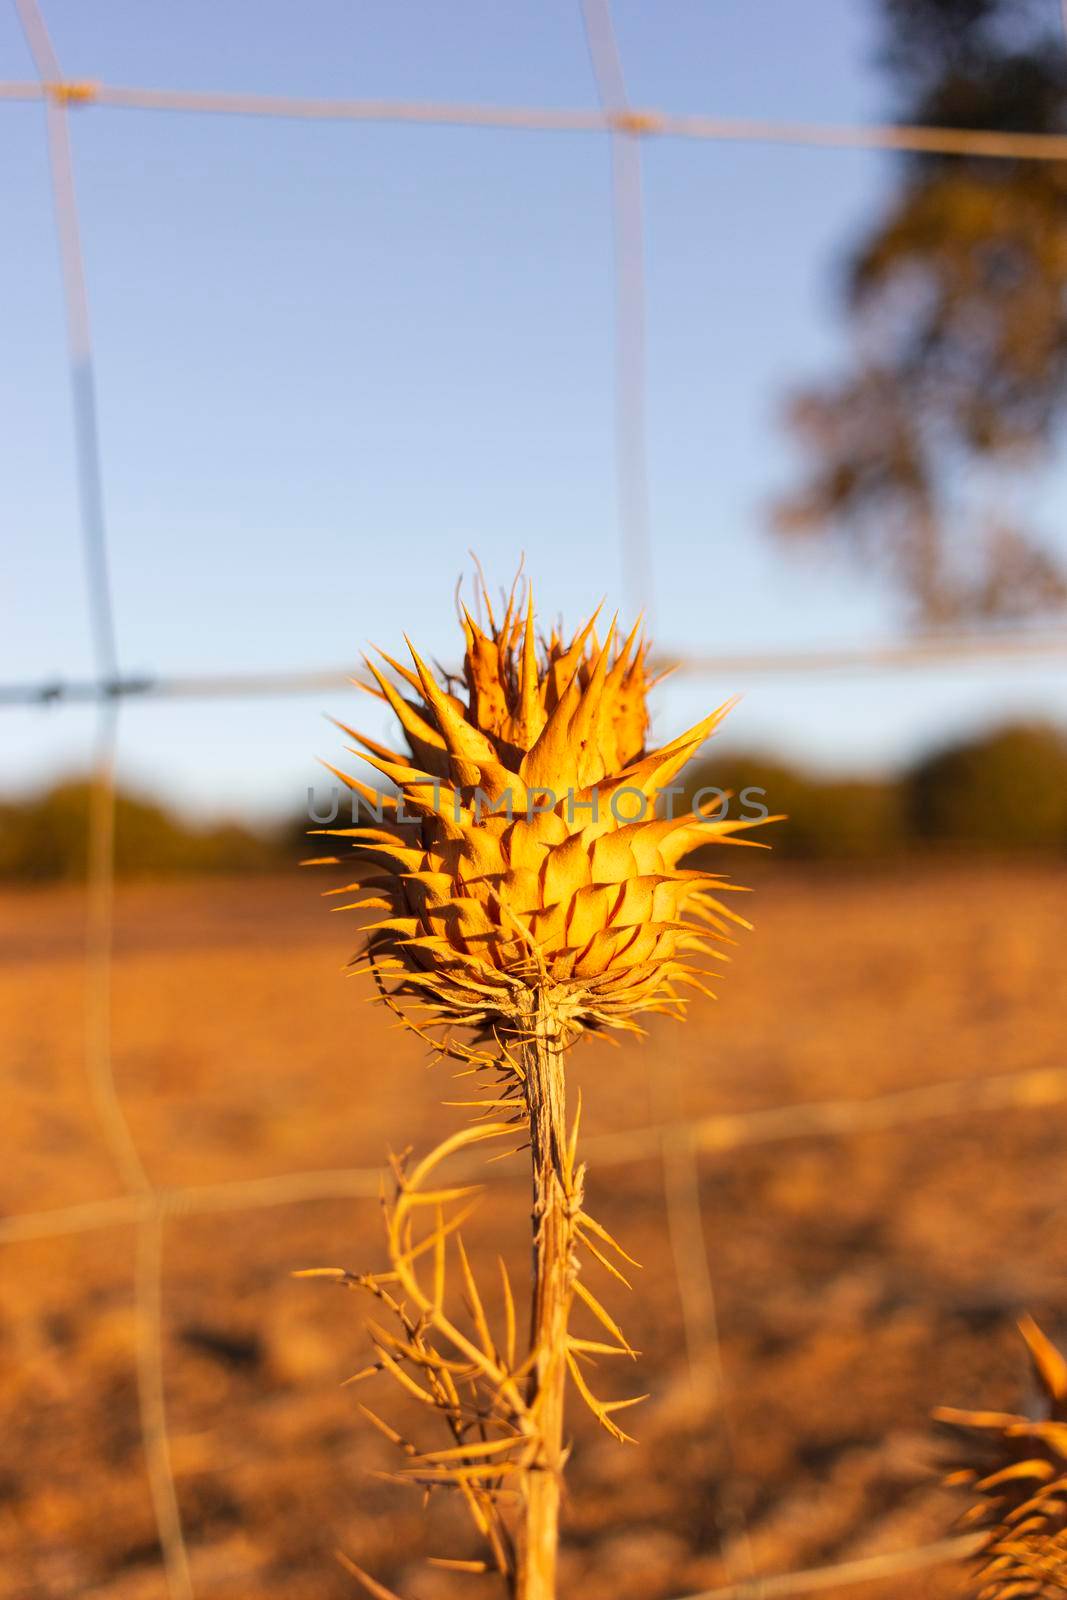 Dried thistles in the field of a village in pain by loopneo